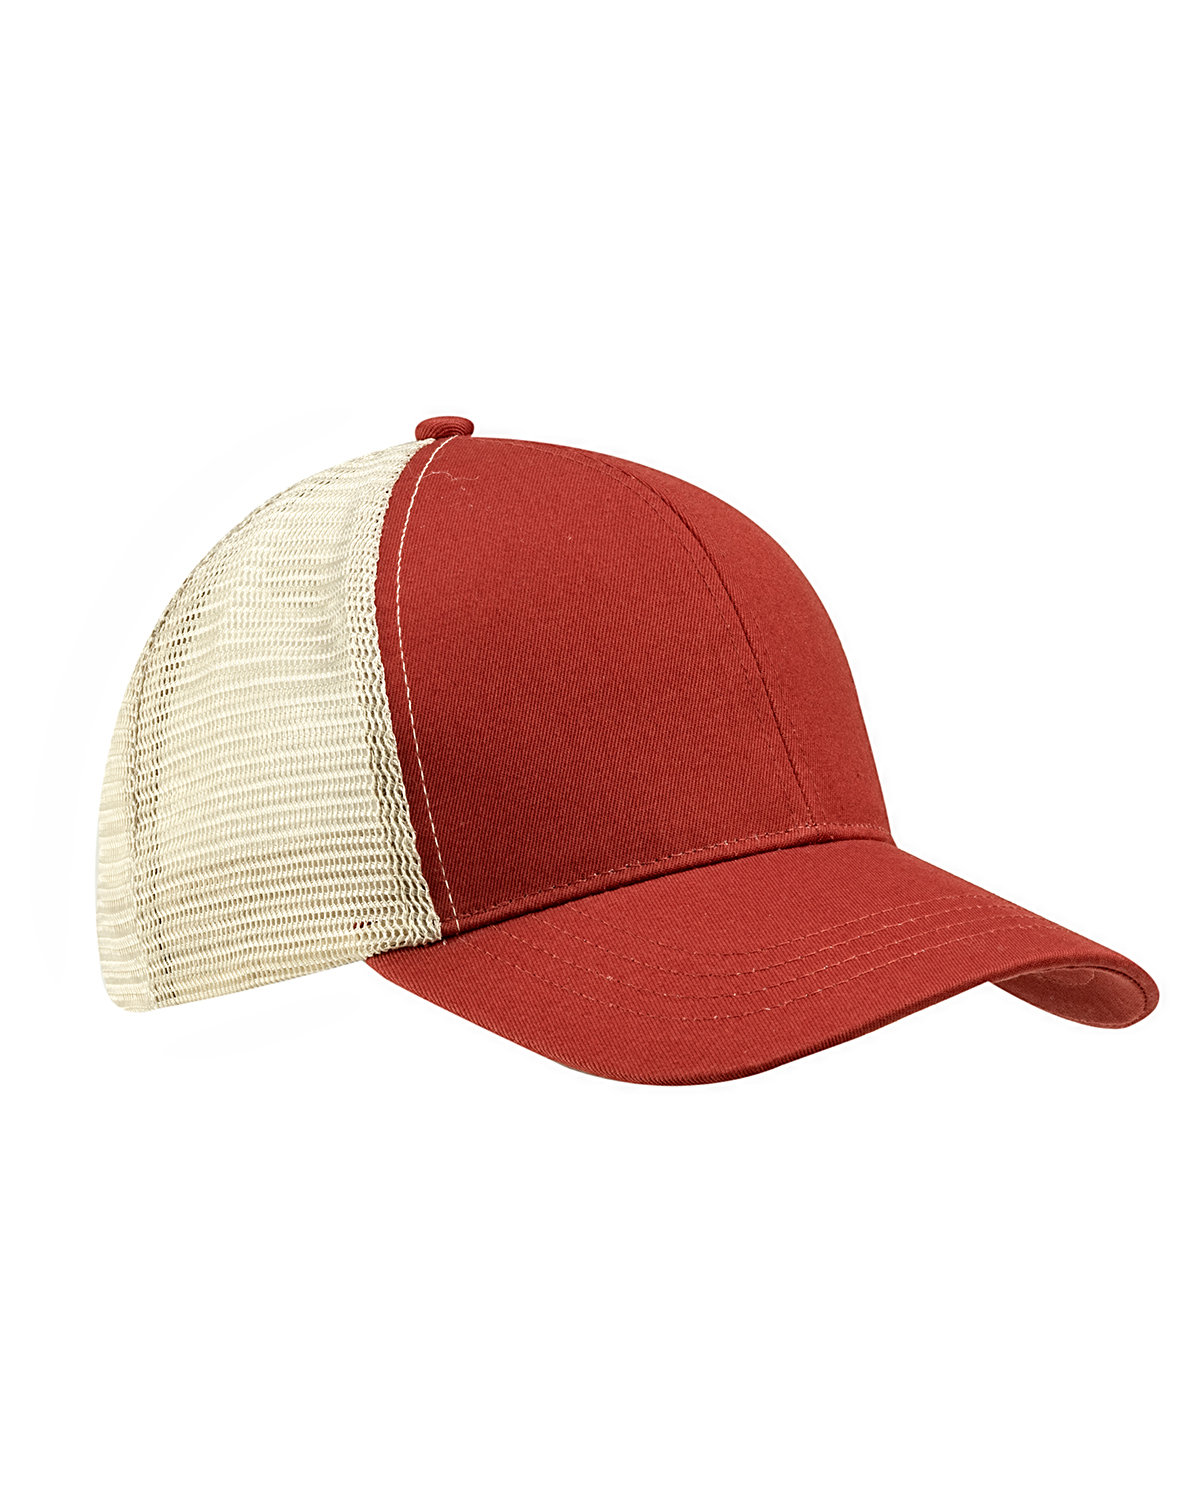 econscious Eco Trucker Organic/Recycled Hat PICANTE/ OYSTER 